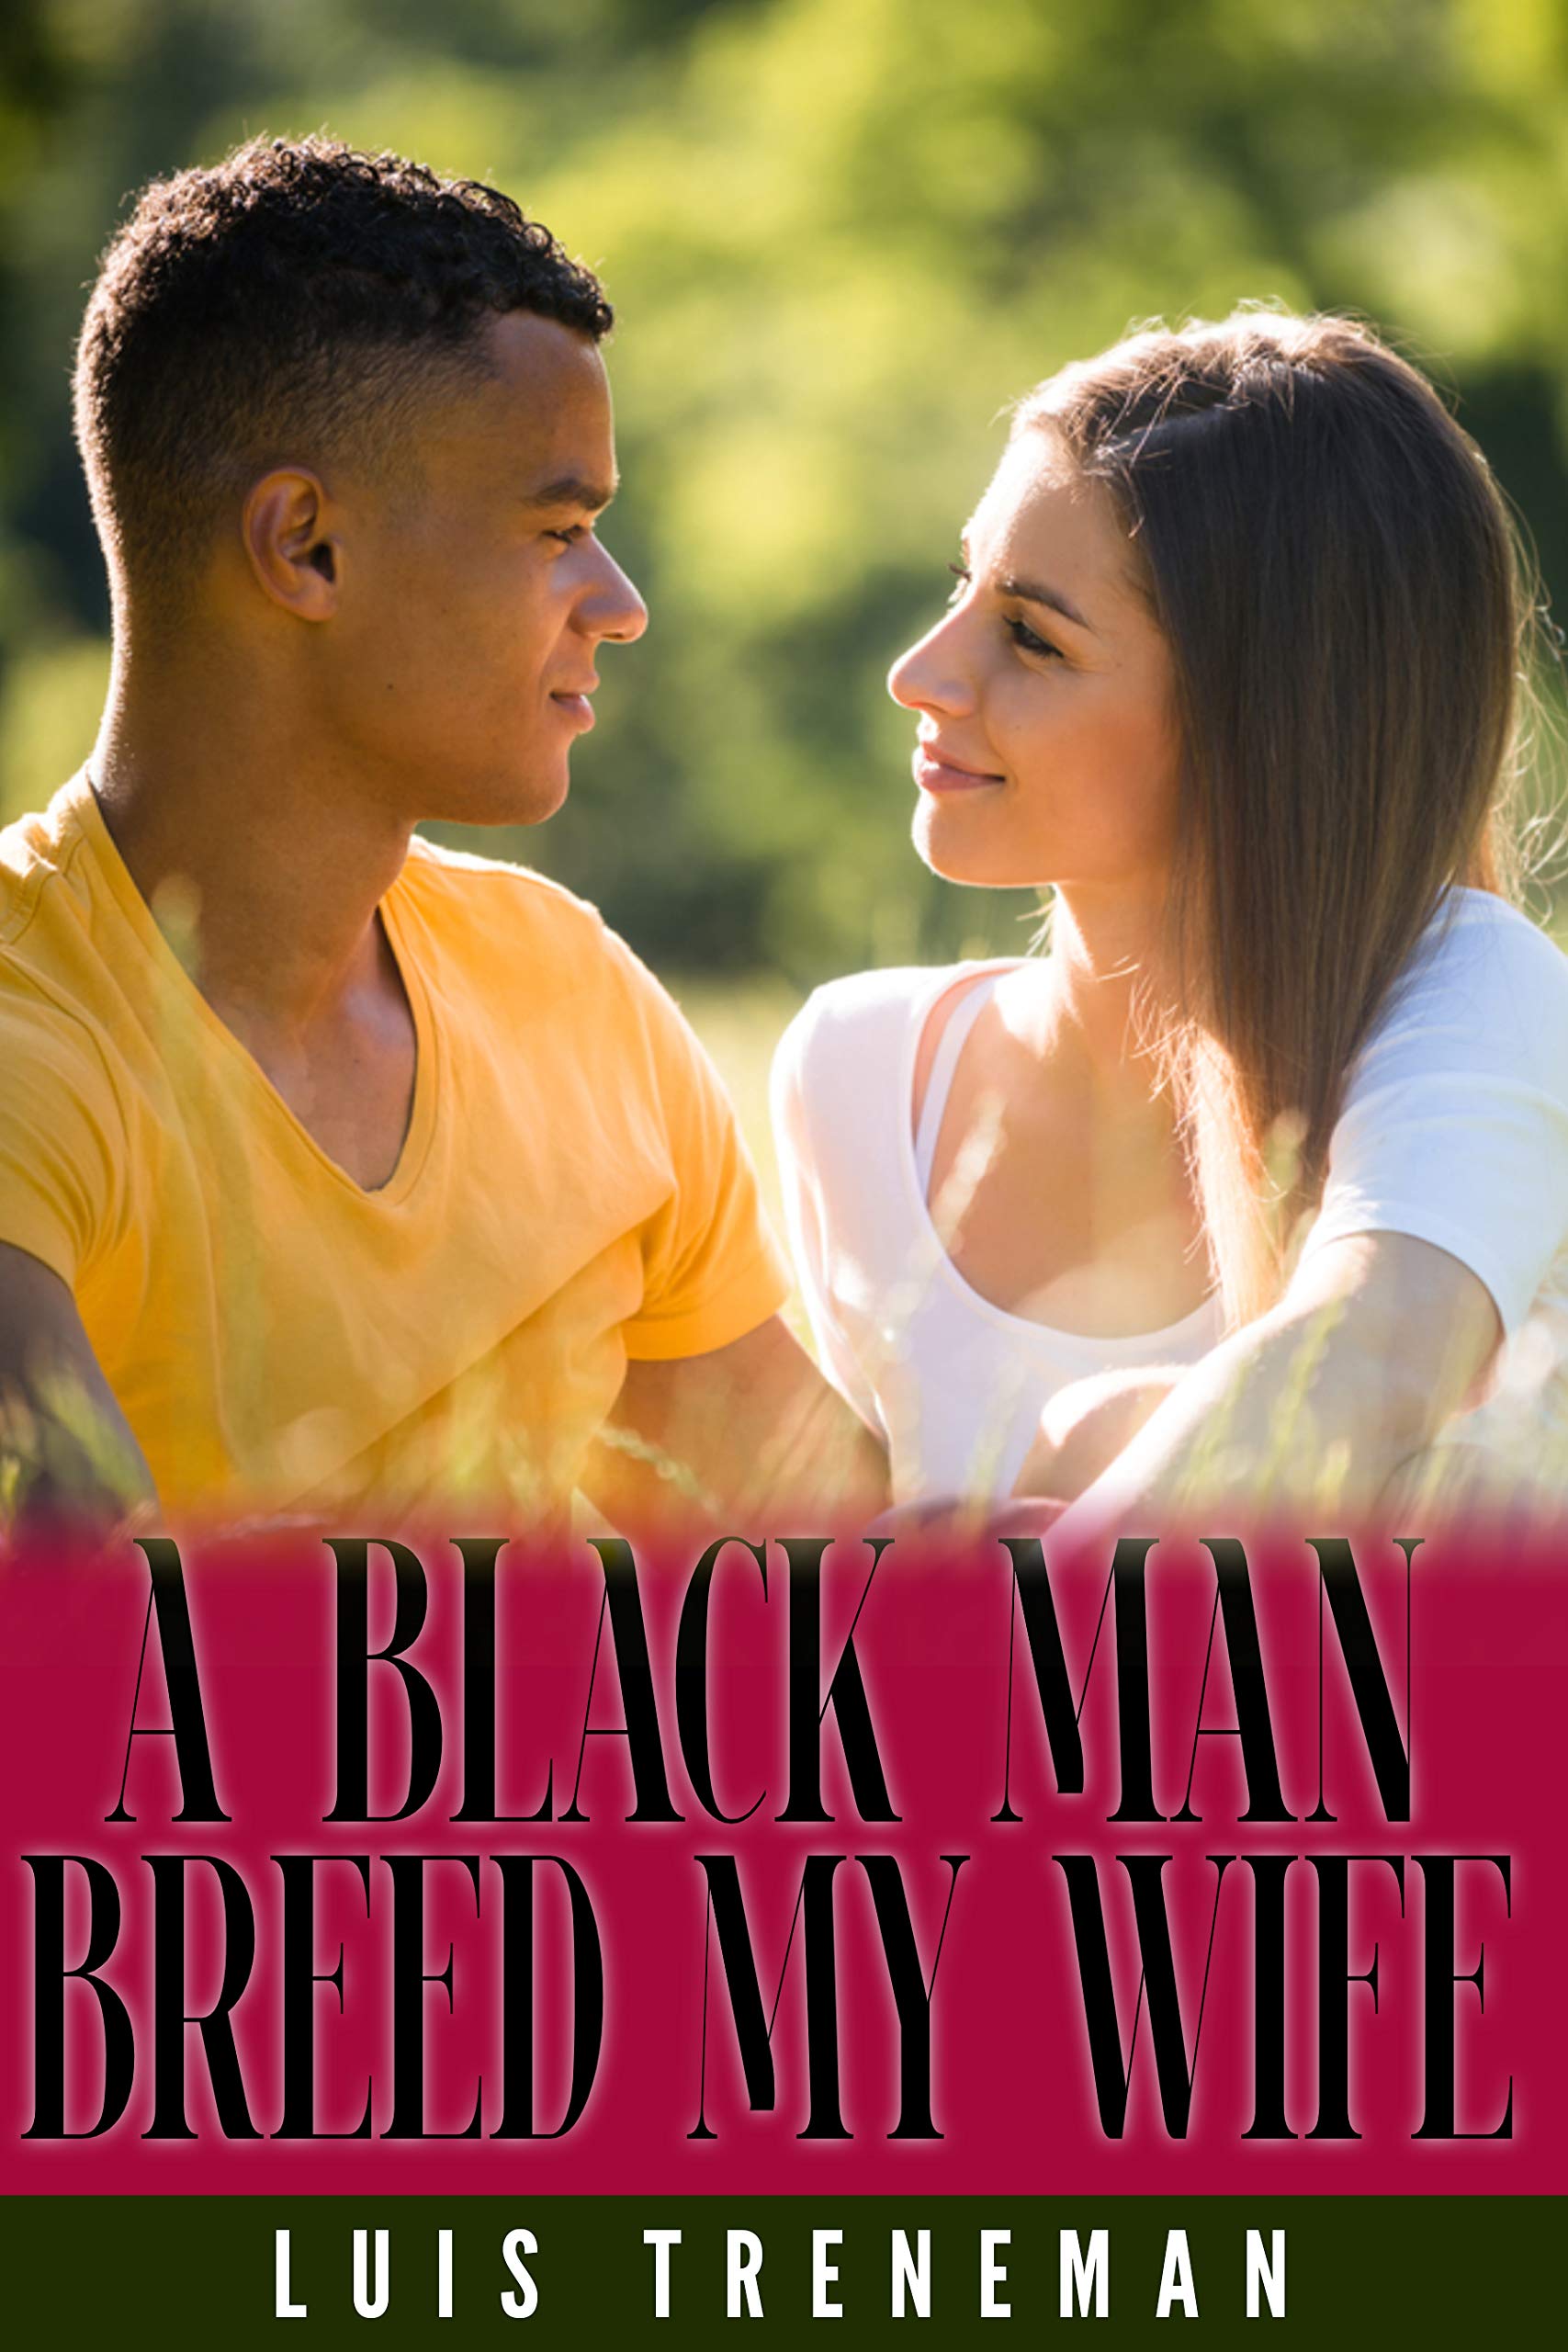 dillon cherrett recommends wife breed by black pic